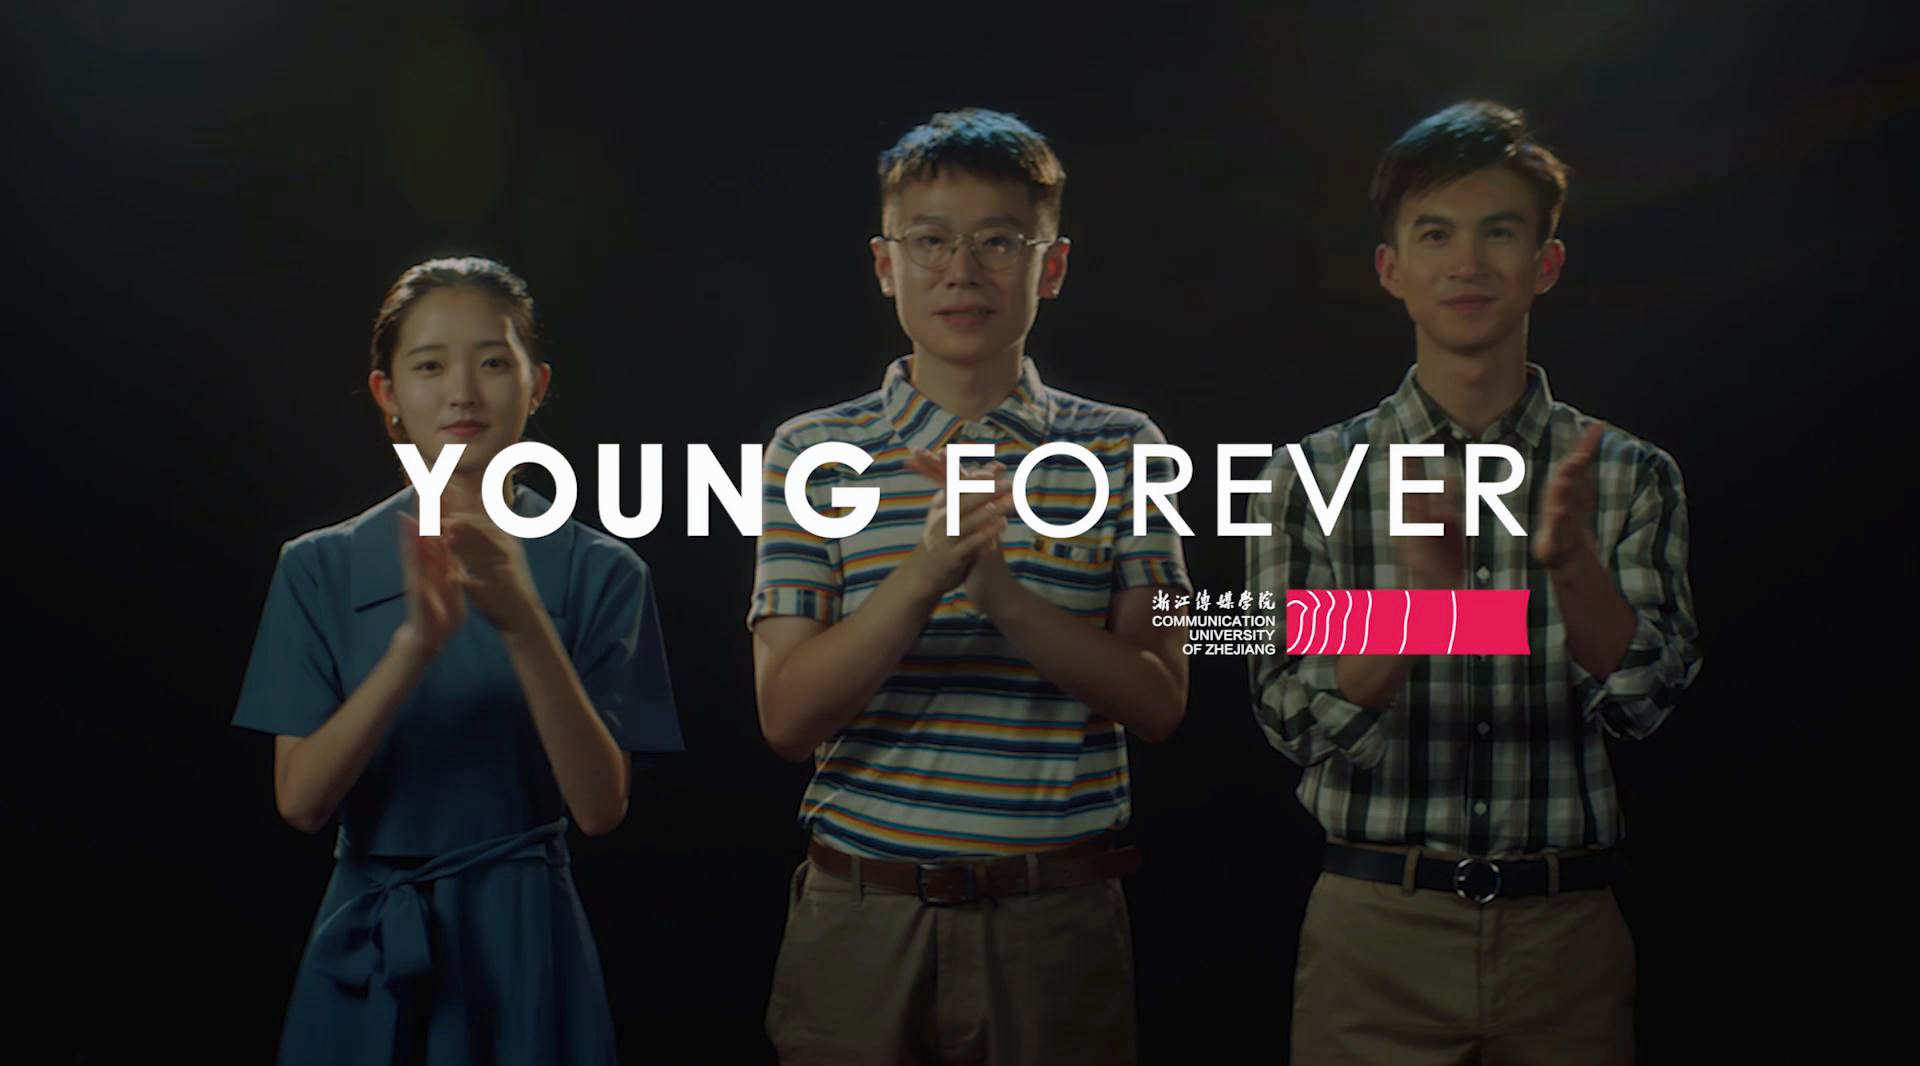 《Young Forever》浙江传媒学院（2018）宣传片系列 